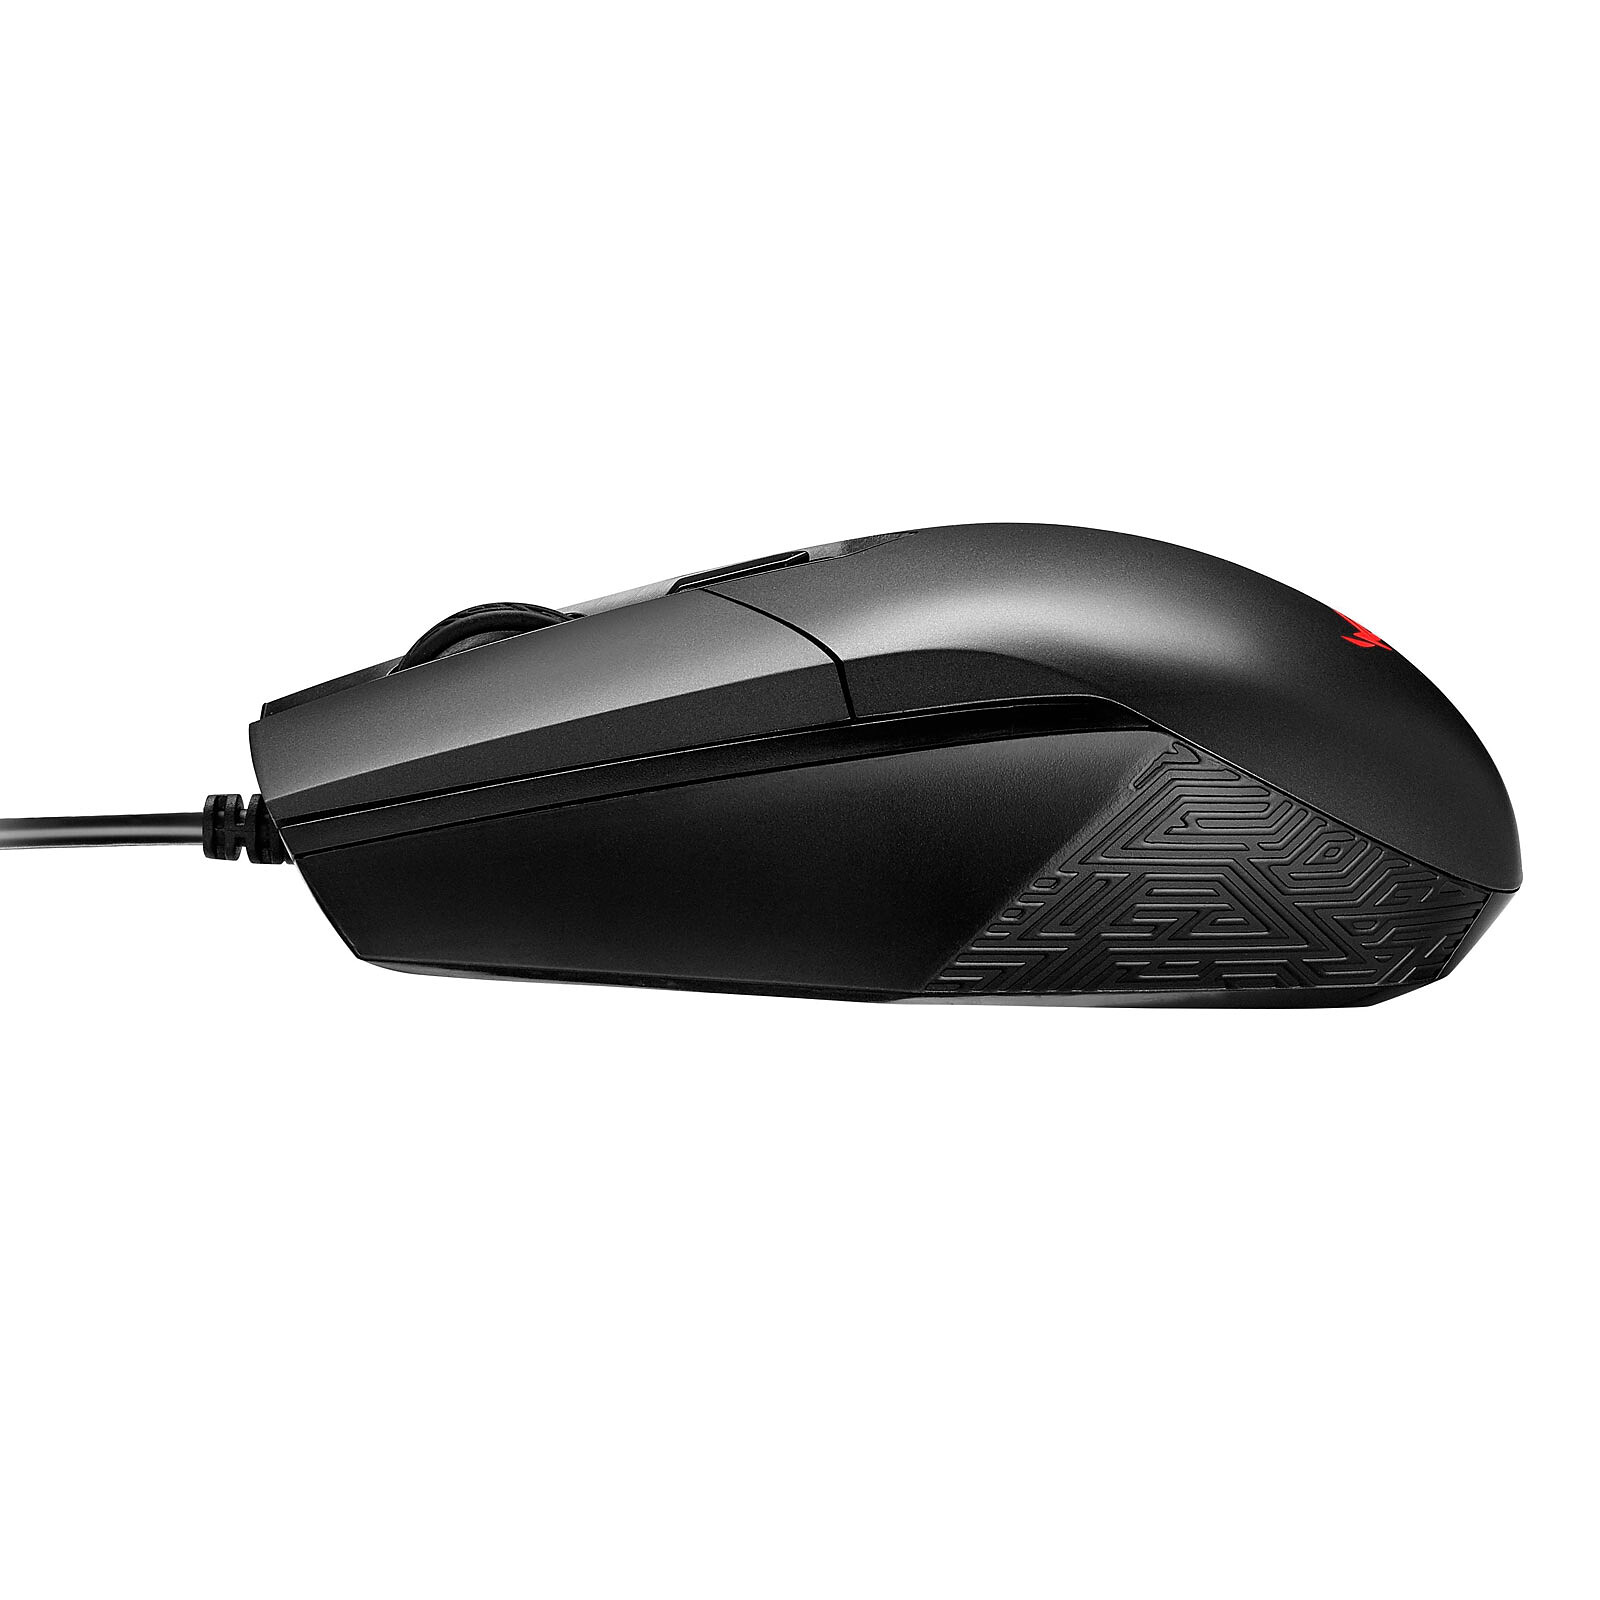 Spirit Of Gamer Xpert-M300 Souris Filaire Pour Gamer - Ambidextre